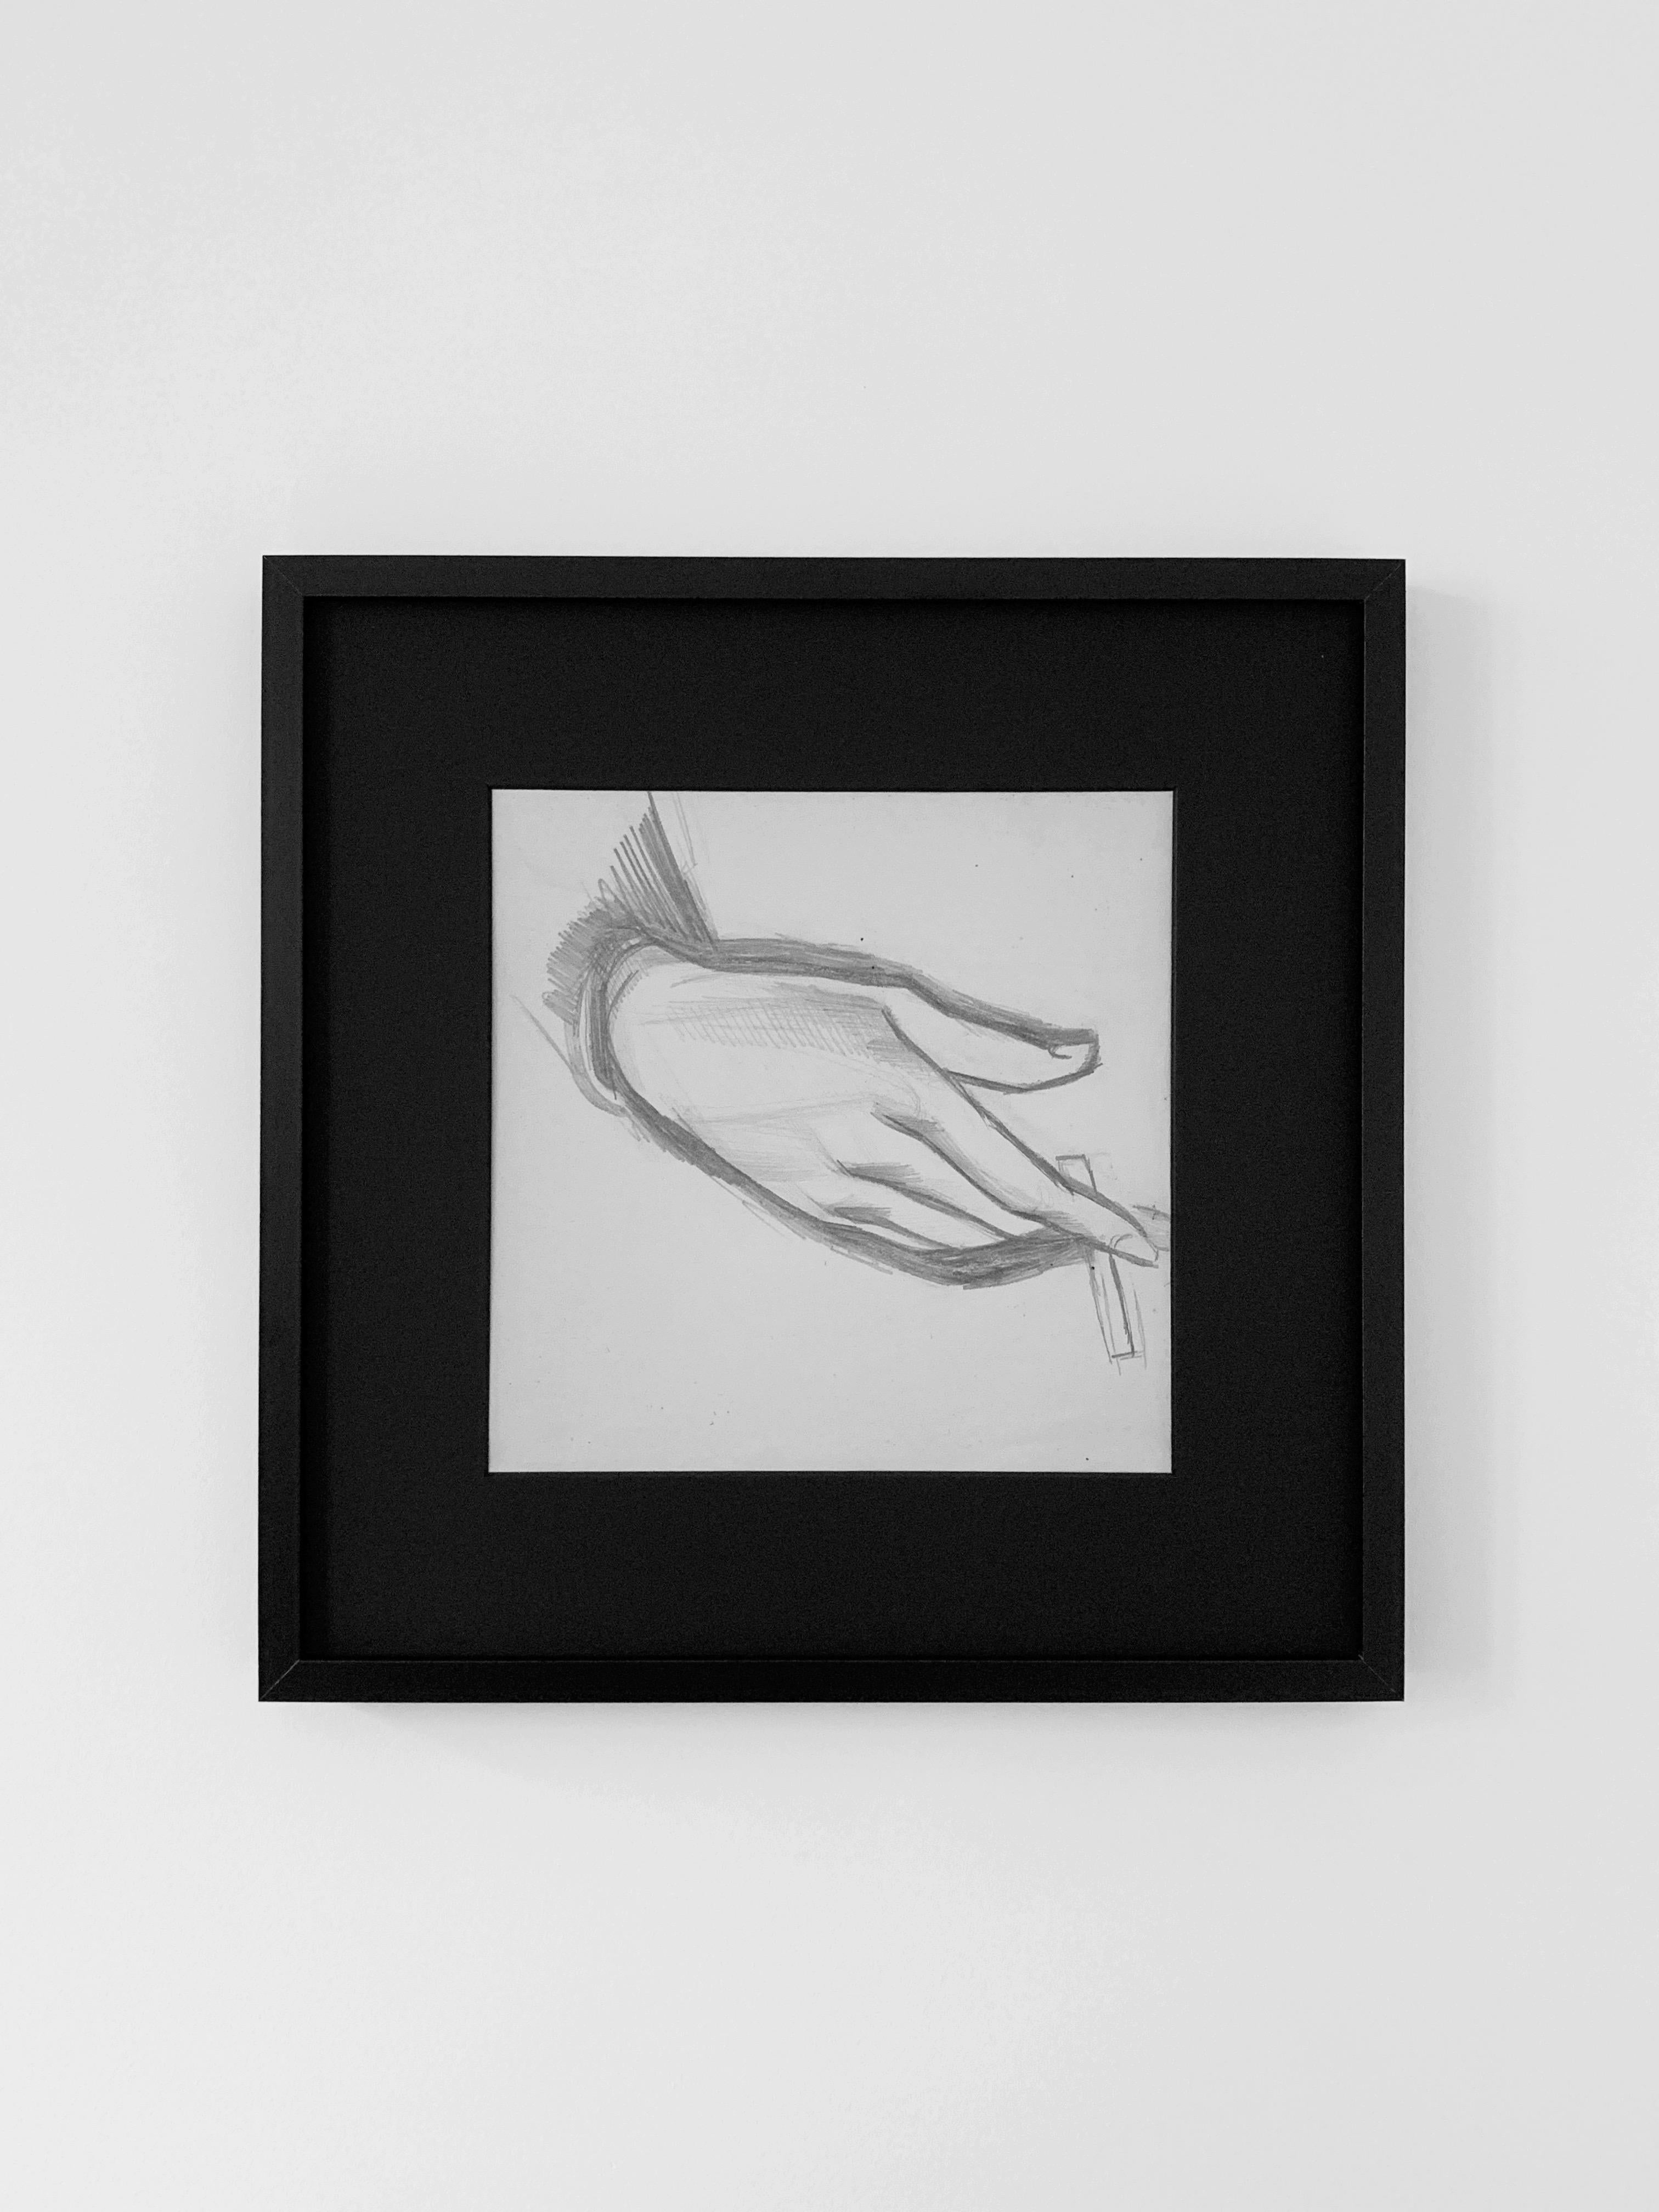 Raymonde Heudebert 1905-1991)
Study of a hand holding a cigarette
Pencil on paper
Annotated “Jean de Vogué” on the back
Dimensions of the drawing : 26 x 27 cm
Dimensions of the frame : 40 x 40 cm

Born in Paris in 1905, Raymonde Heudebert joined the